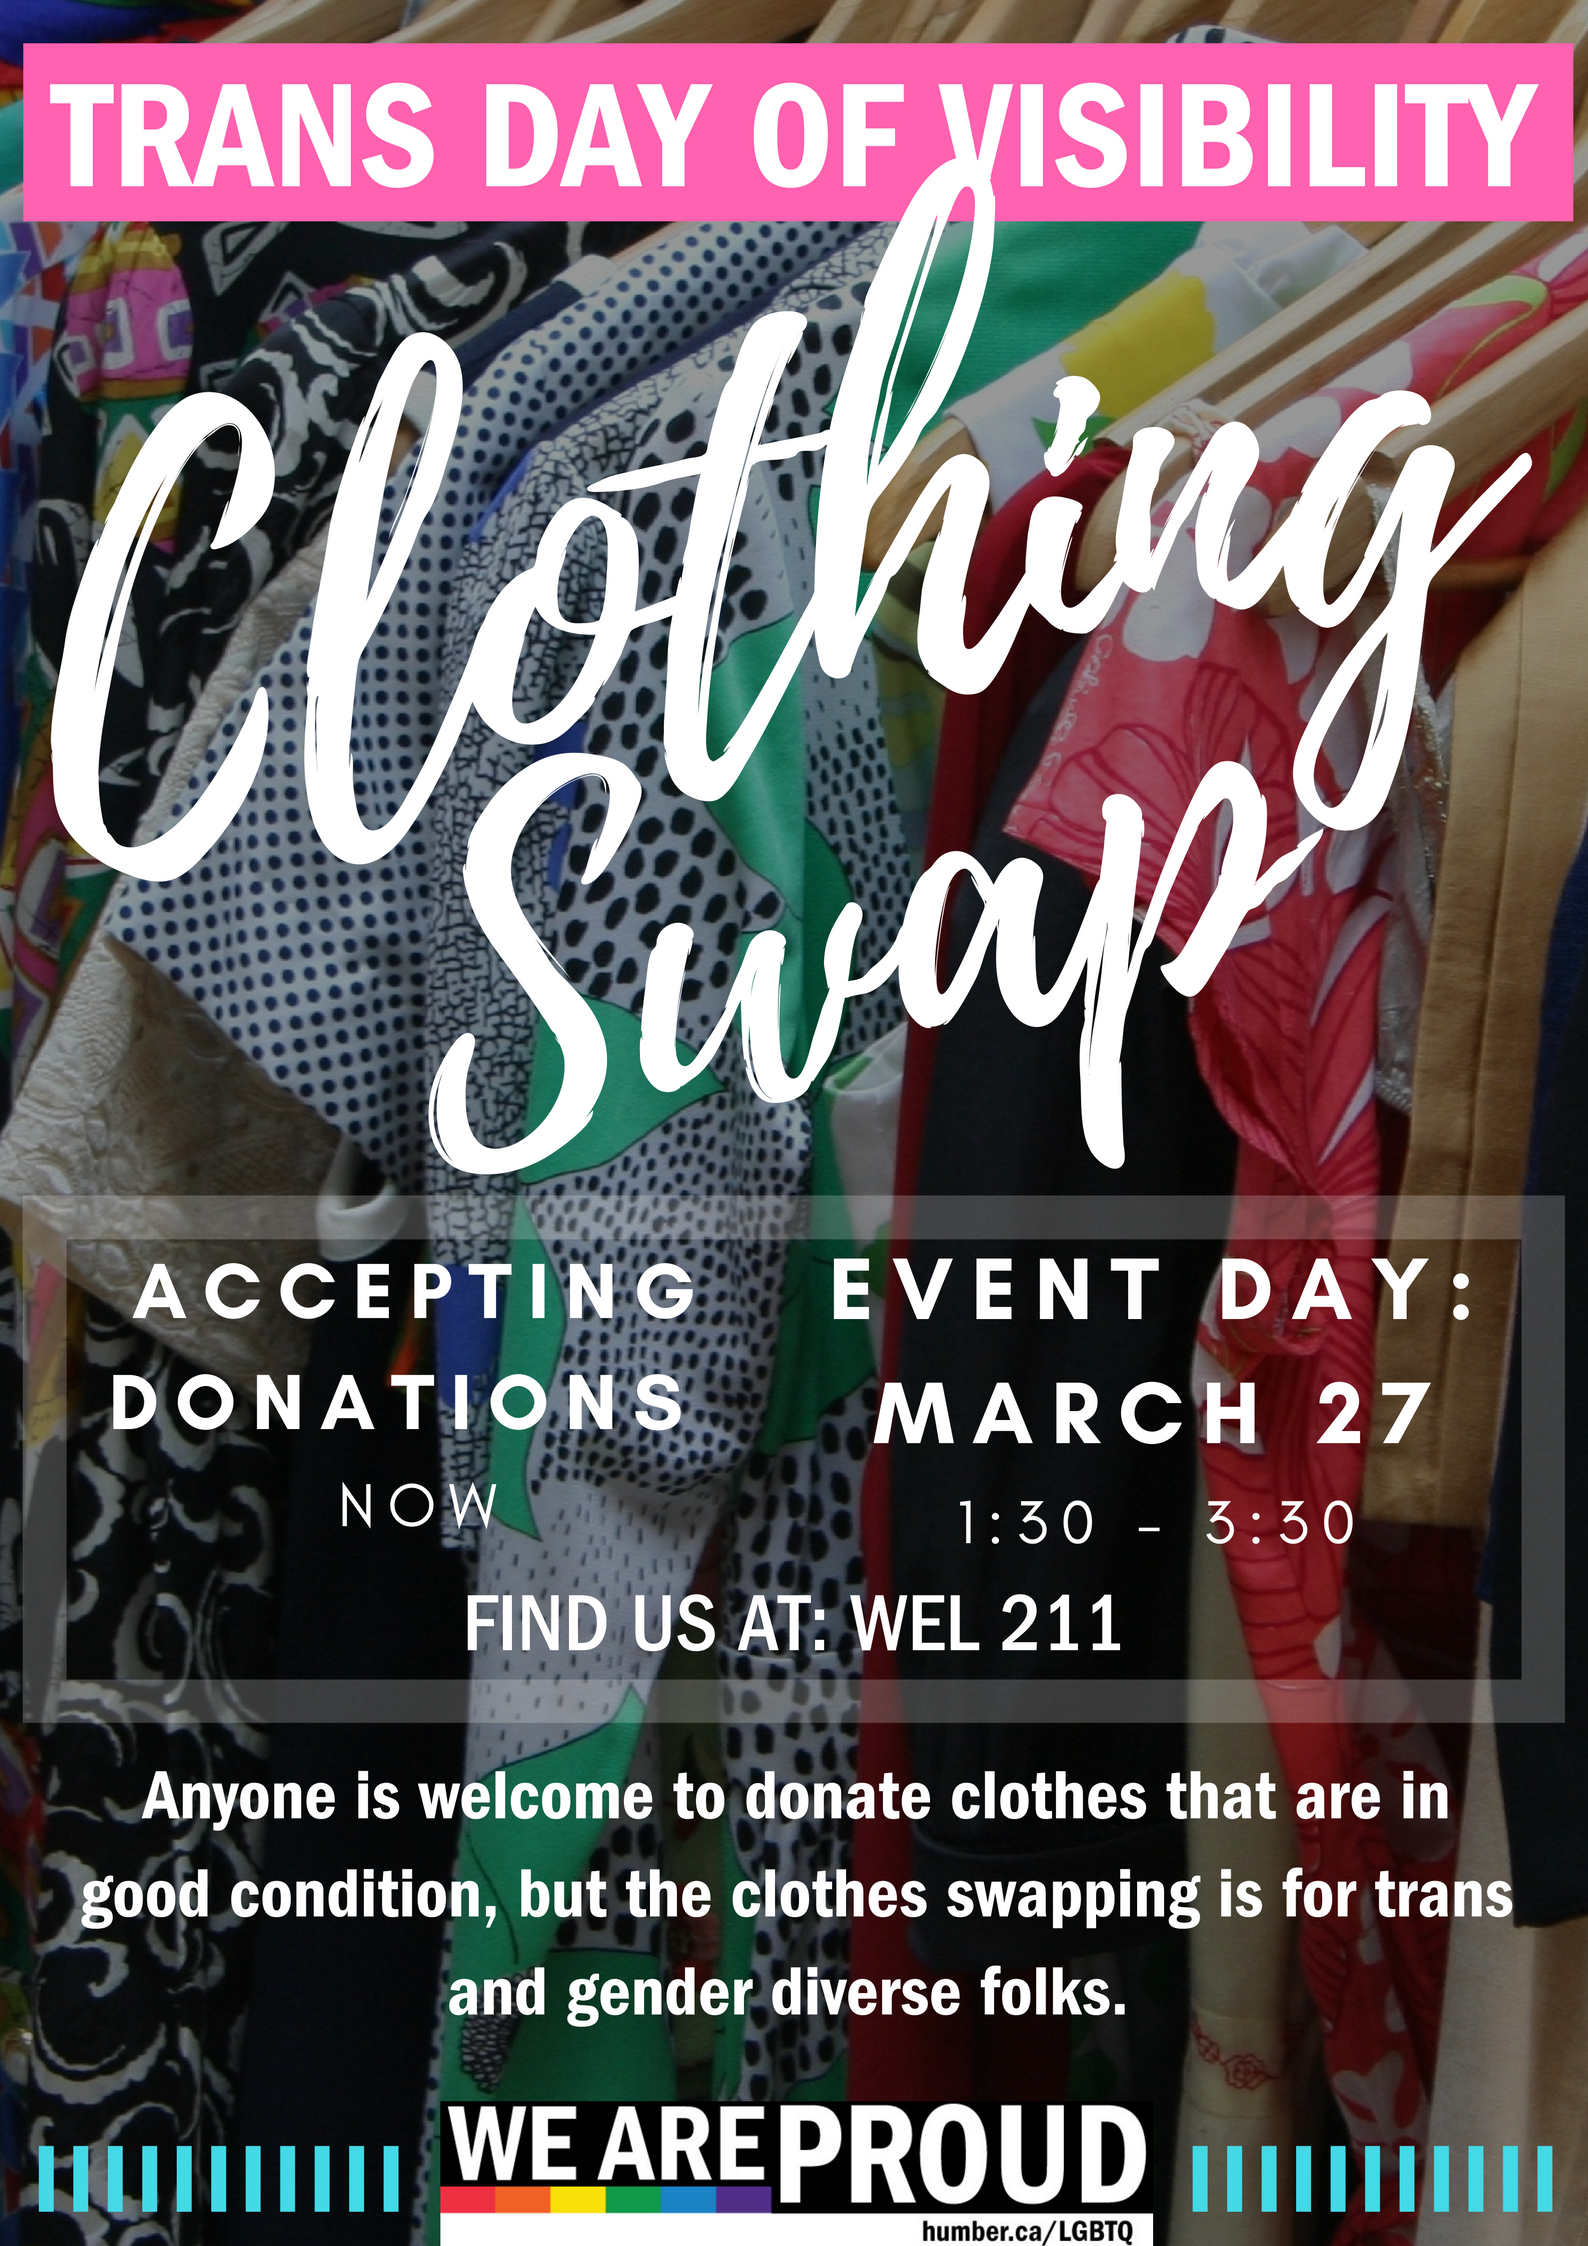 Trans Day of Visibility Clothing Swap. Accepting donations now. Event day: March 27 1:30-3:30. Find us at L WEL211. Anyone is welcome to donate clothes that are in good condition, but the clothes swapping is for trans and gender diverse folks. 